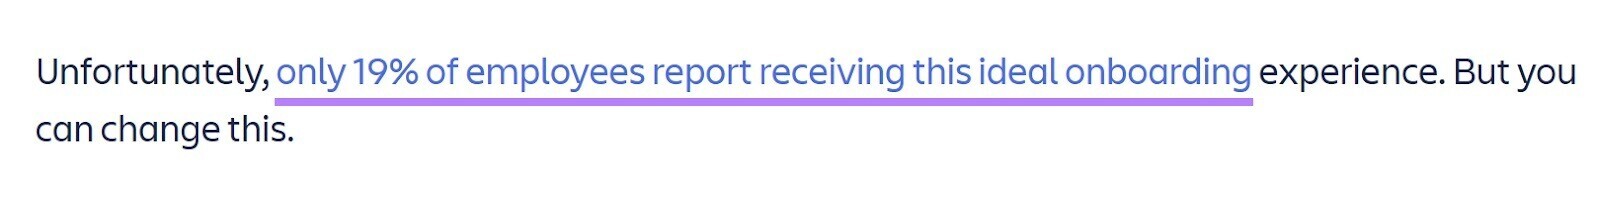 example of a sentence linking to relevant source with anchor text "only 19% of employees report receiving this ideal onboarding"